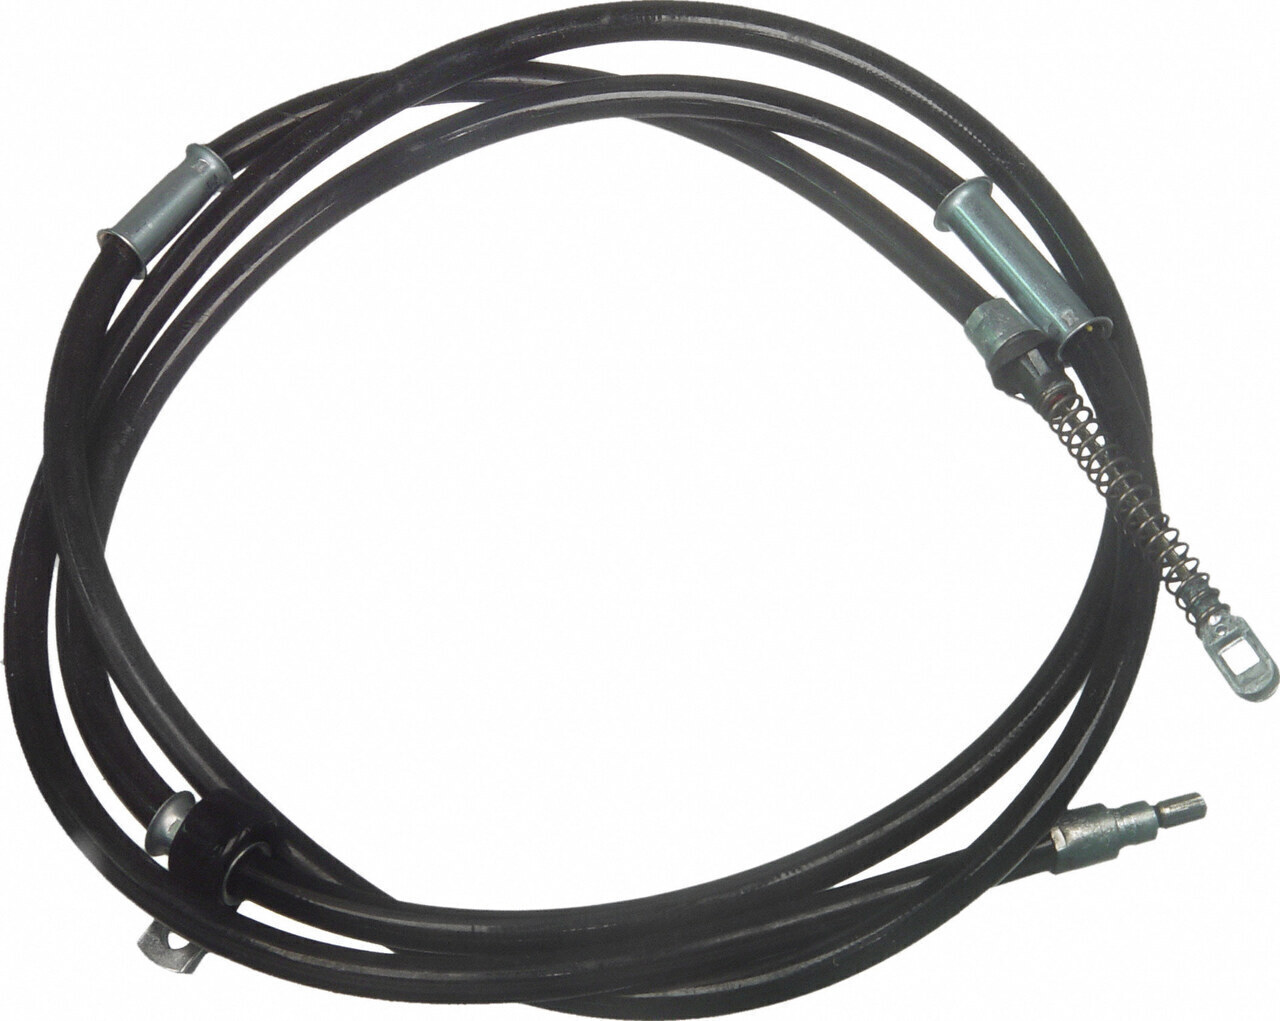 ACDelco 15796856 GM Original Equipment Rear Parking Brake Cable Assembly